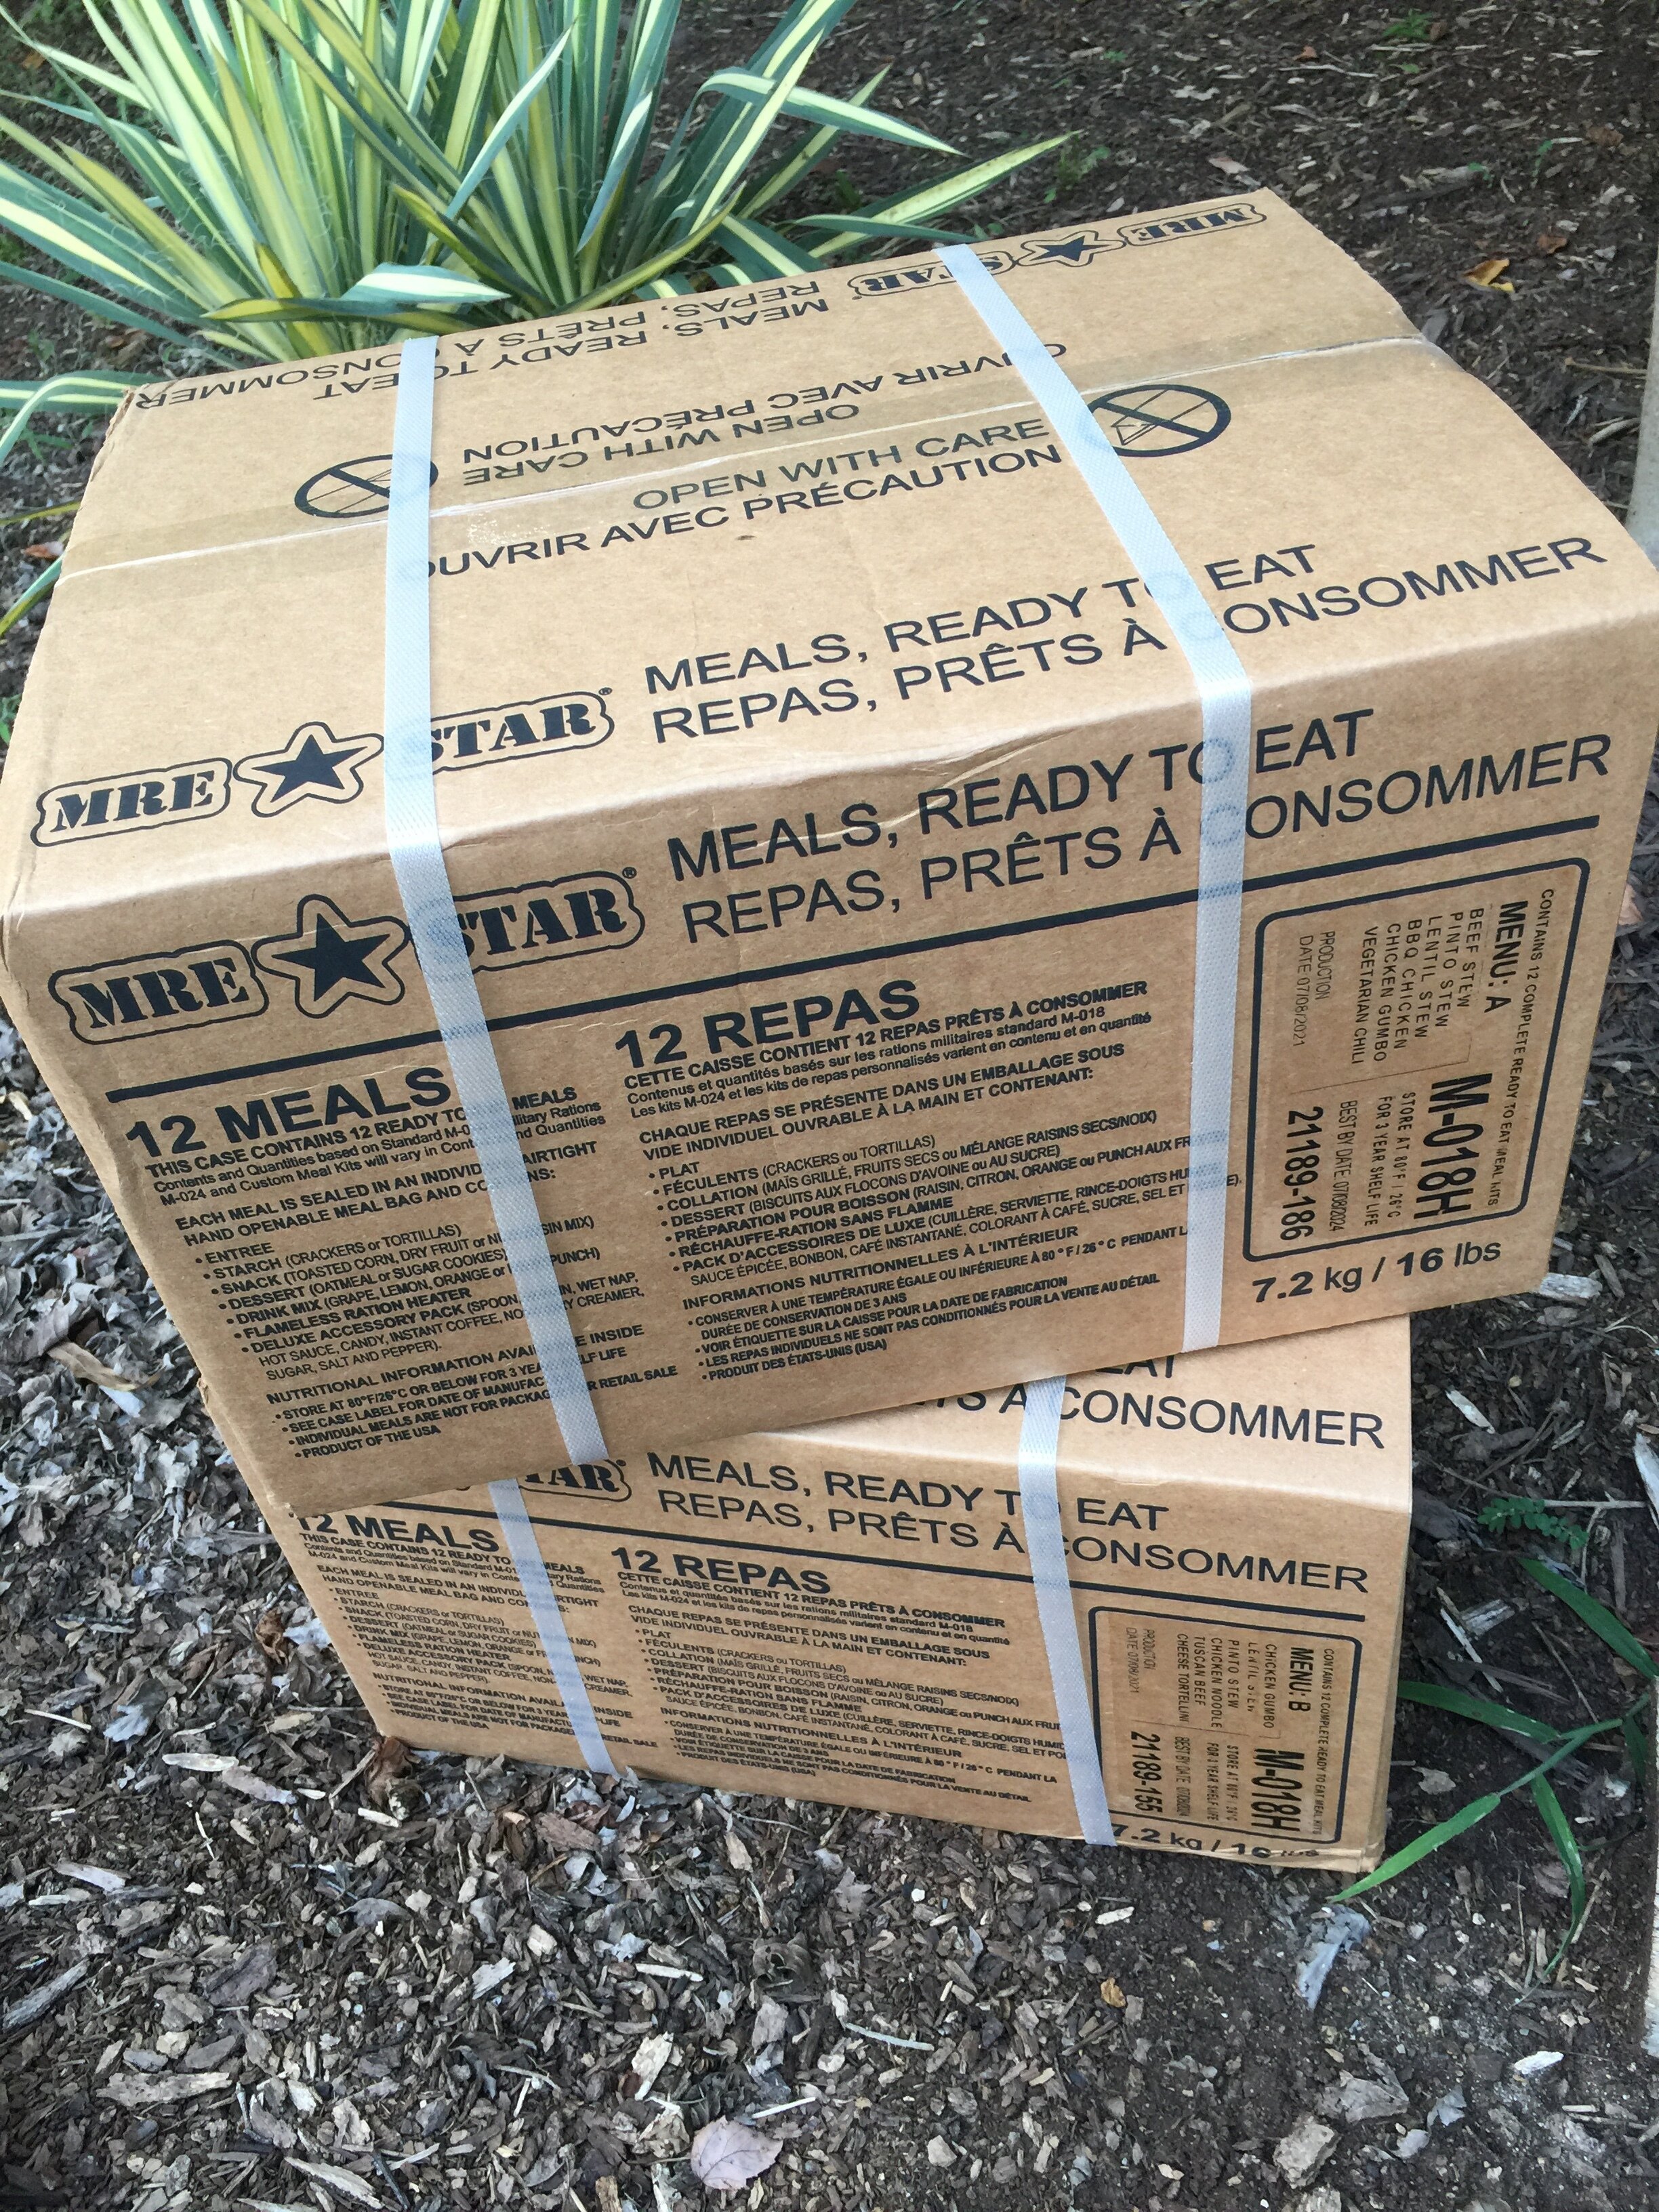 Best MRE Kits (Meal, Ready to Eat)